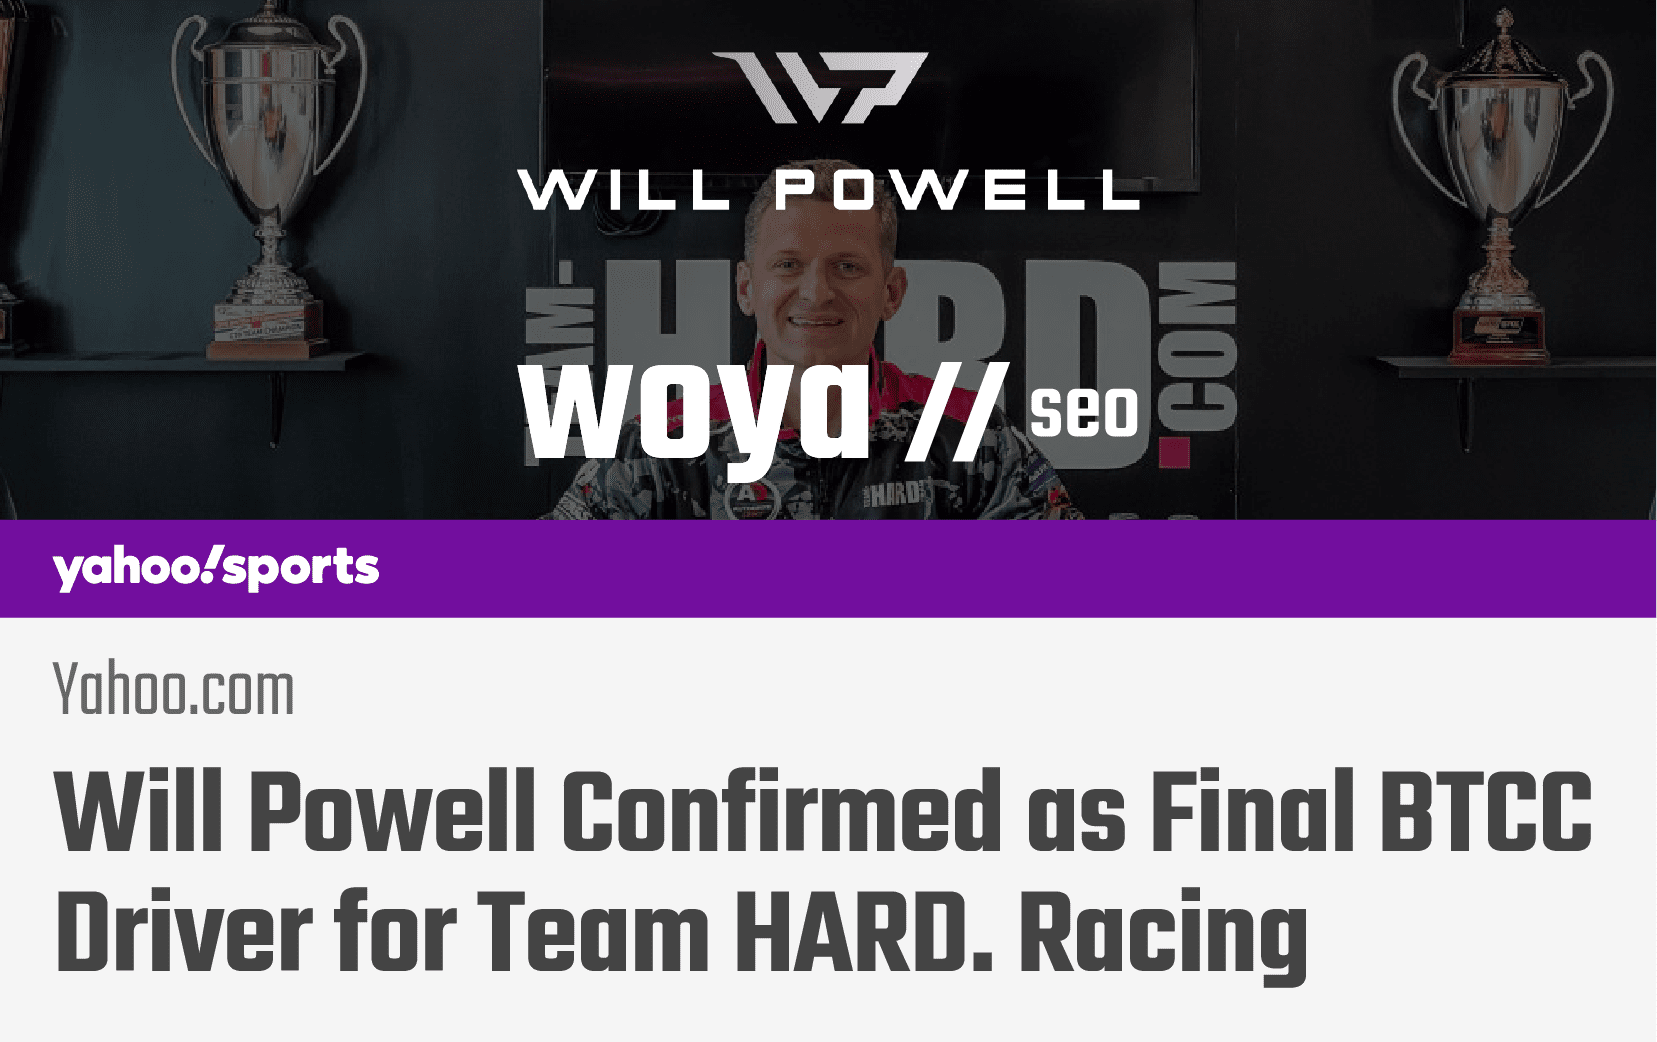 Proud Digital Media Partners of Will Powell in the British Touring Car Championship